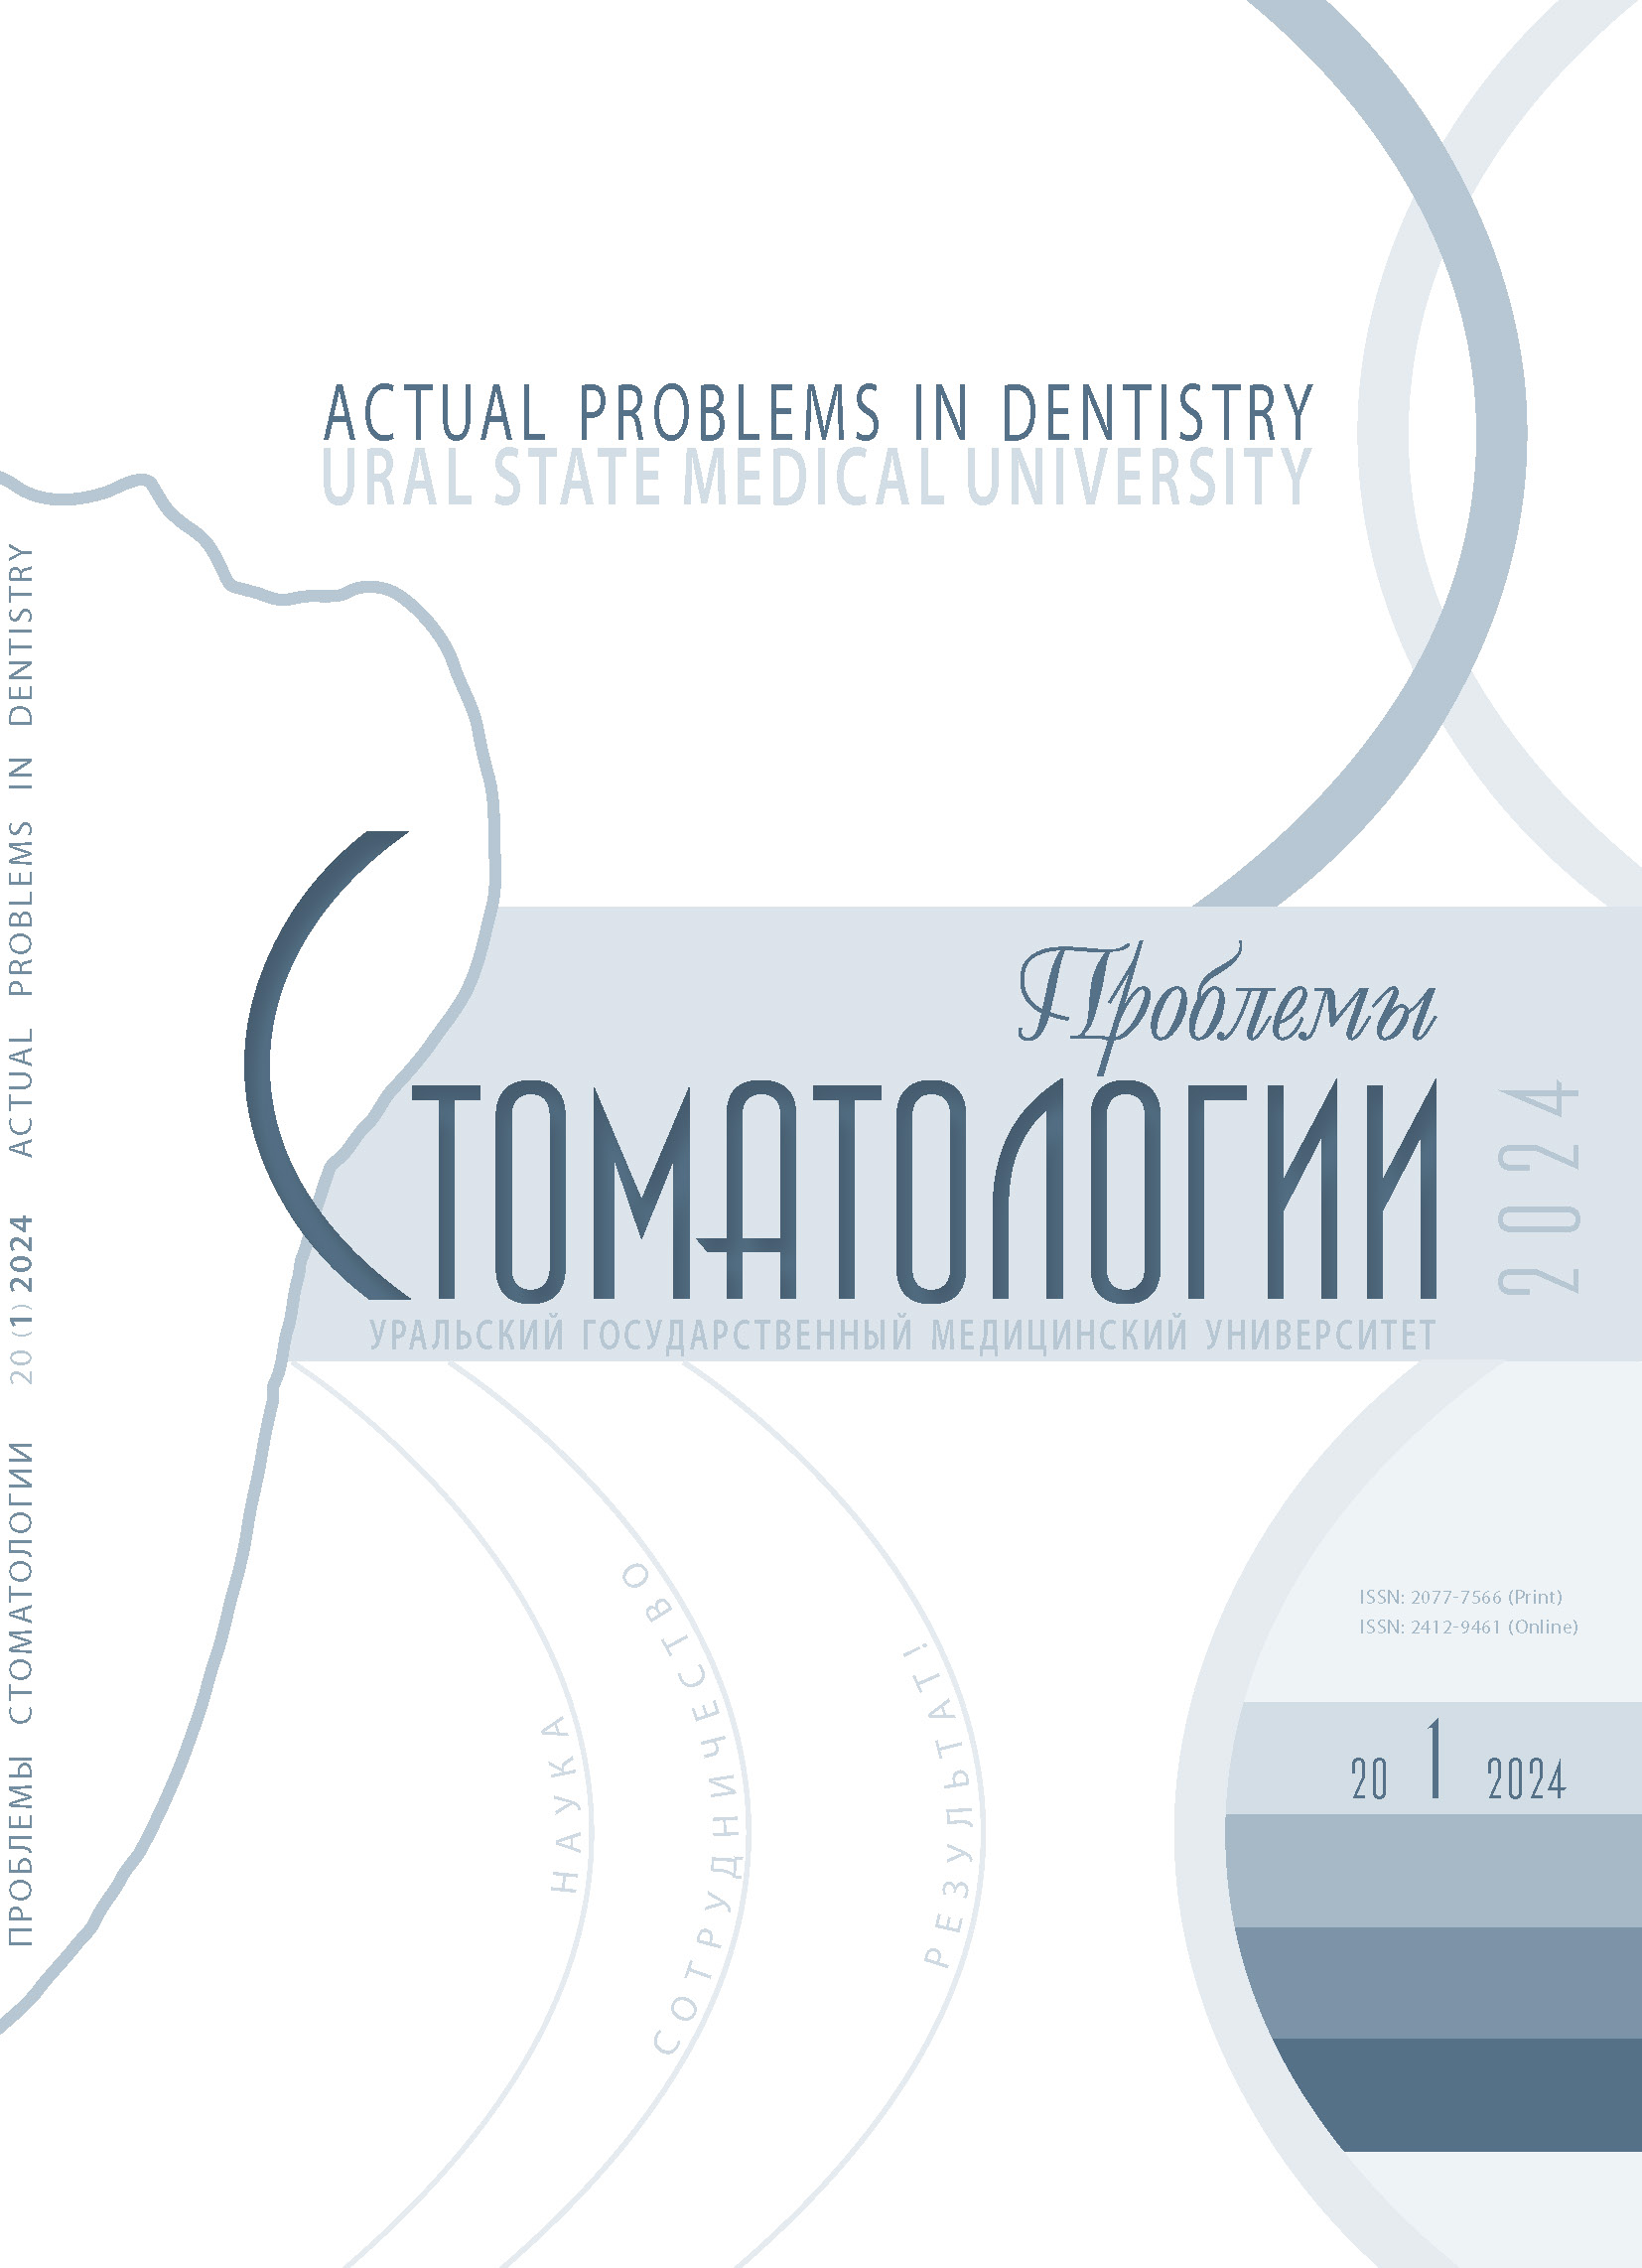                         REVIEW AND COMPARISON MODERN 3D-TECHNOLOGIES FOR DENTISTRY AVAILABLE ON RUSSIAN MARKET
            